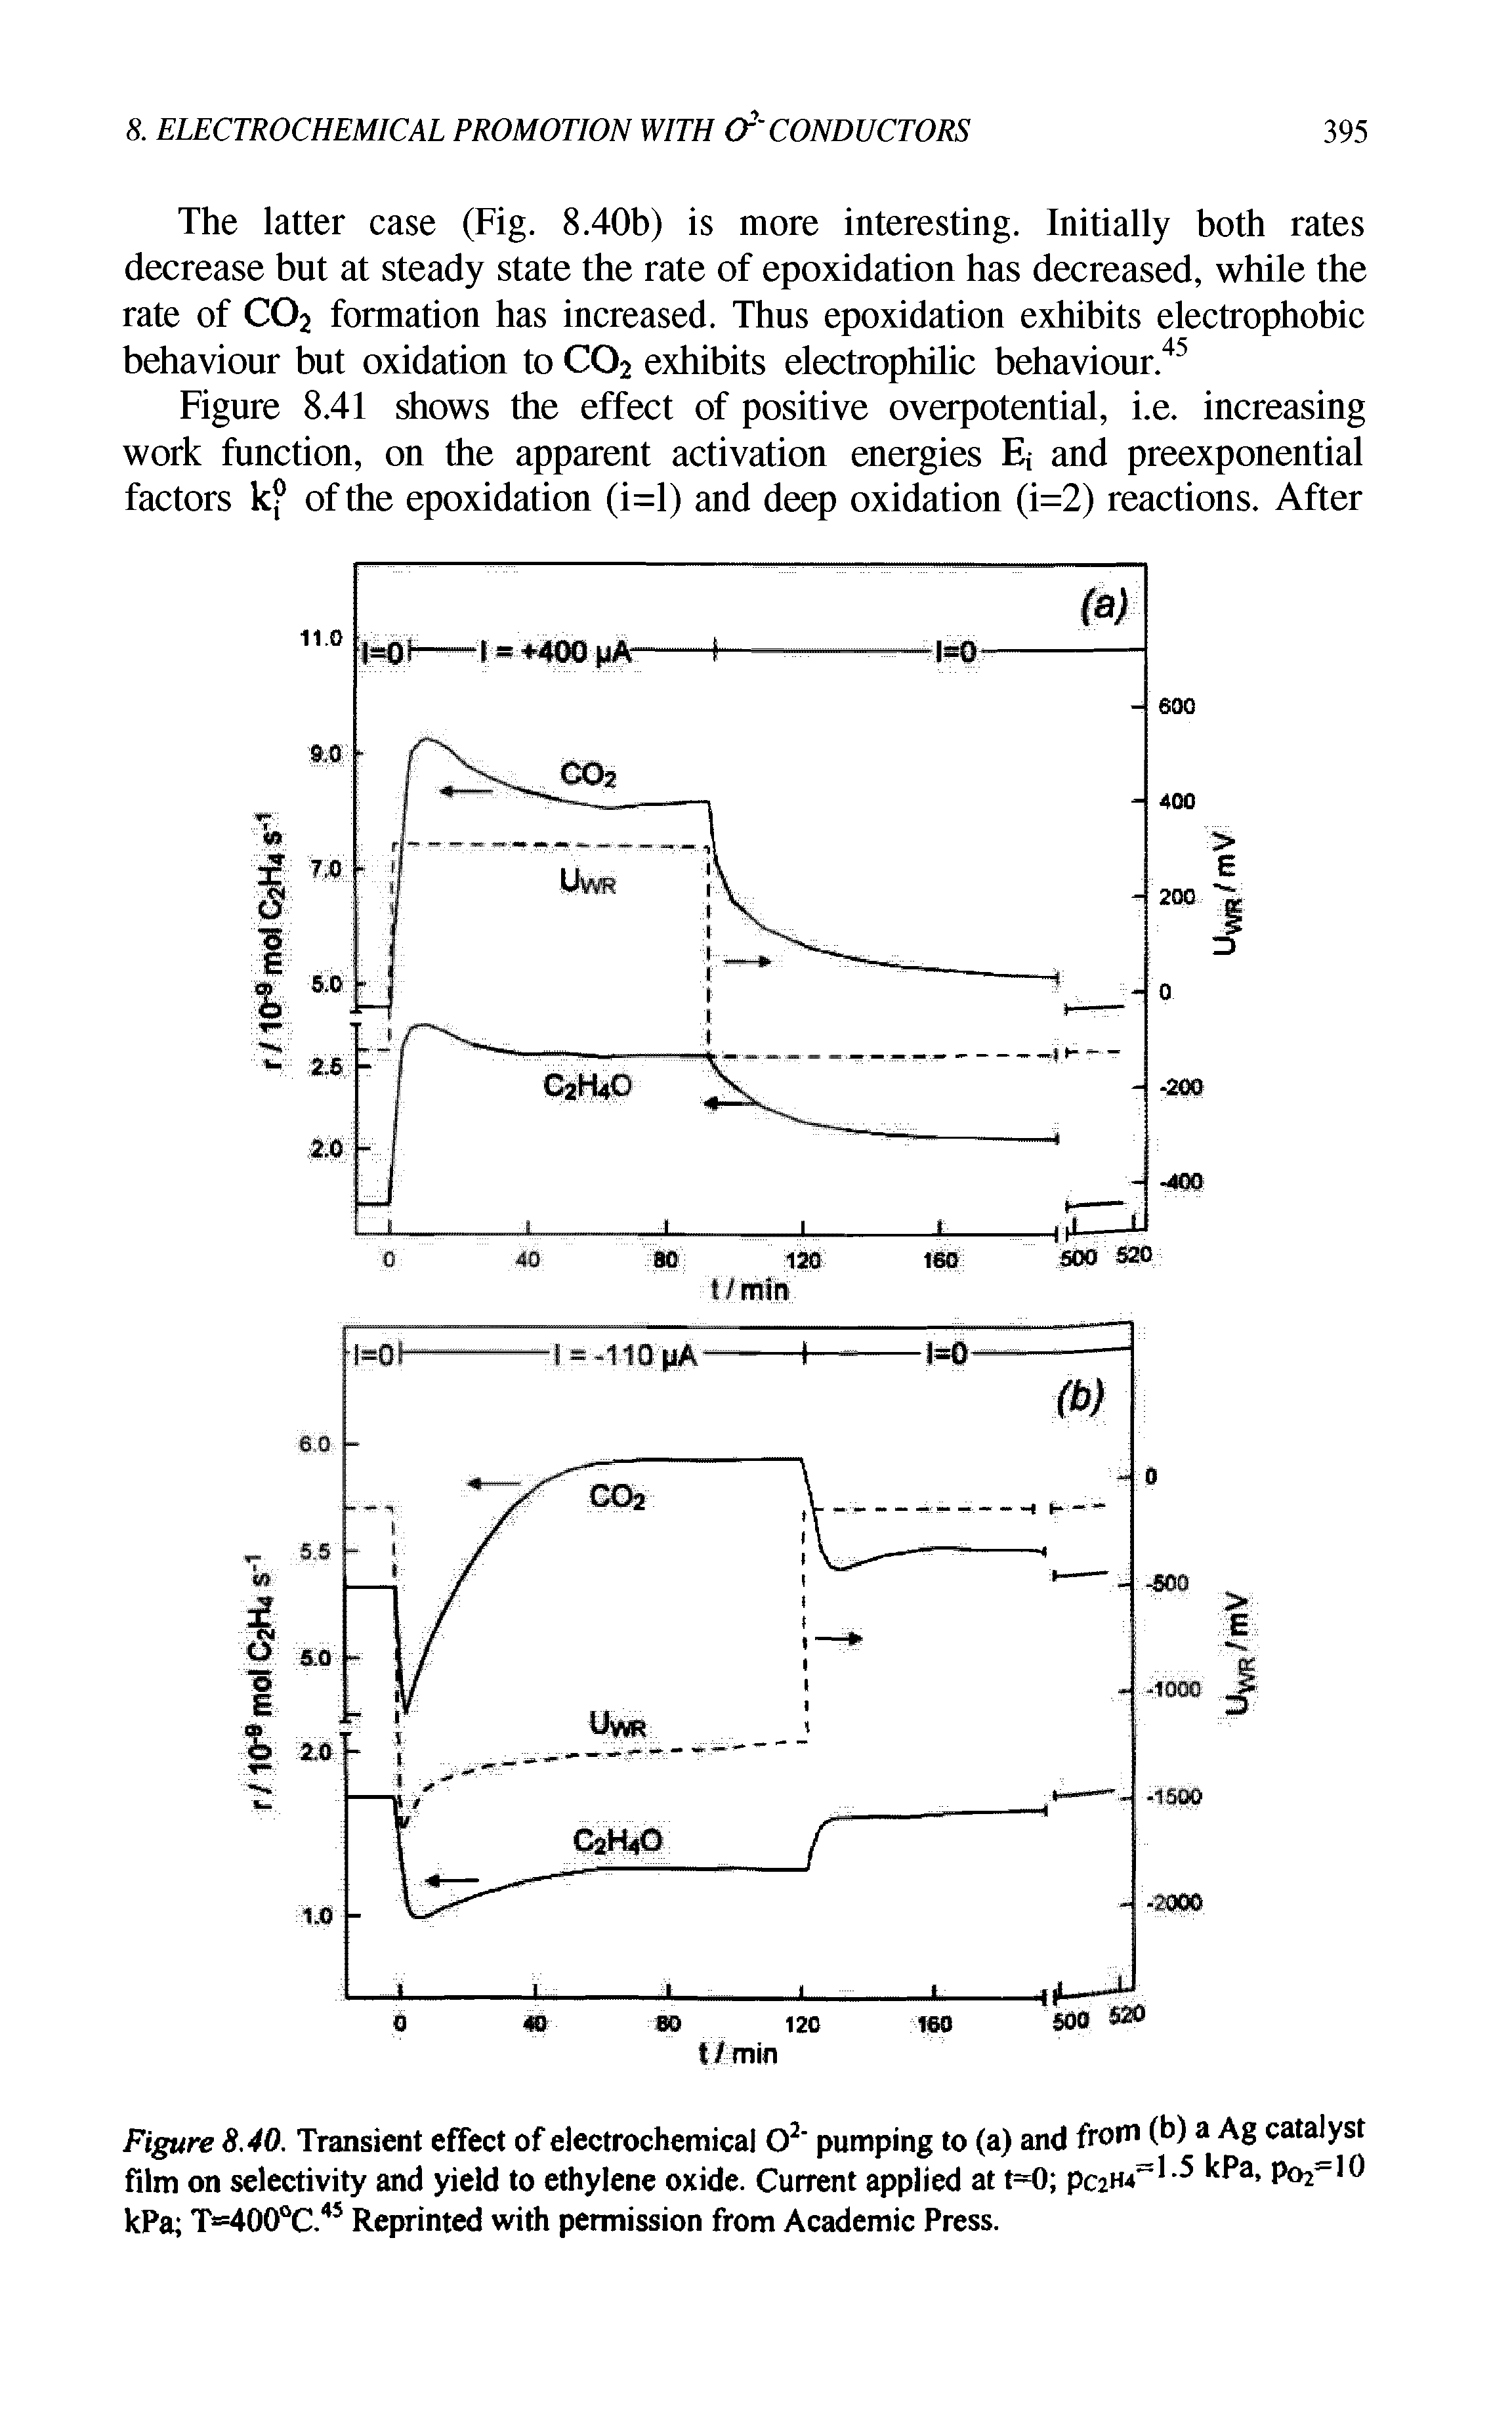 Figure 8.40. Transient effect of electrochemical O2 pumping to (a) and from (b) a Ag catalyst film on selectivity and yield to ethylene oxide. Current applied at t=0 pC2H4" - Pa, Poj-lO kPa T=400°C.45 Reprinted with permission from Academic Press.